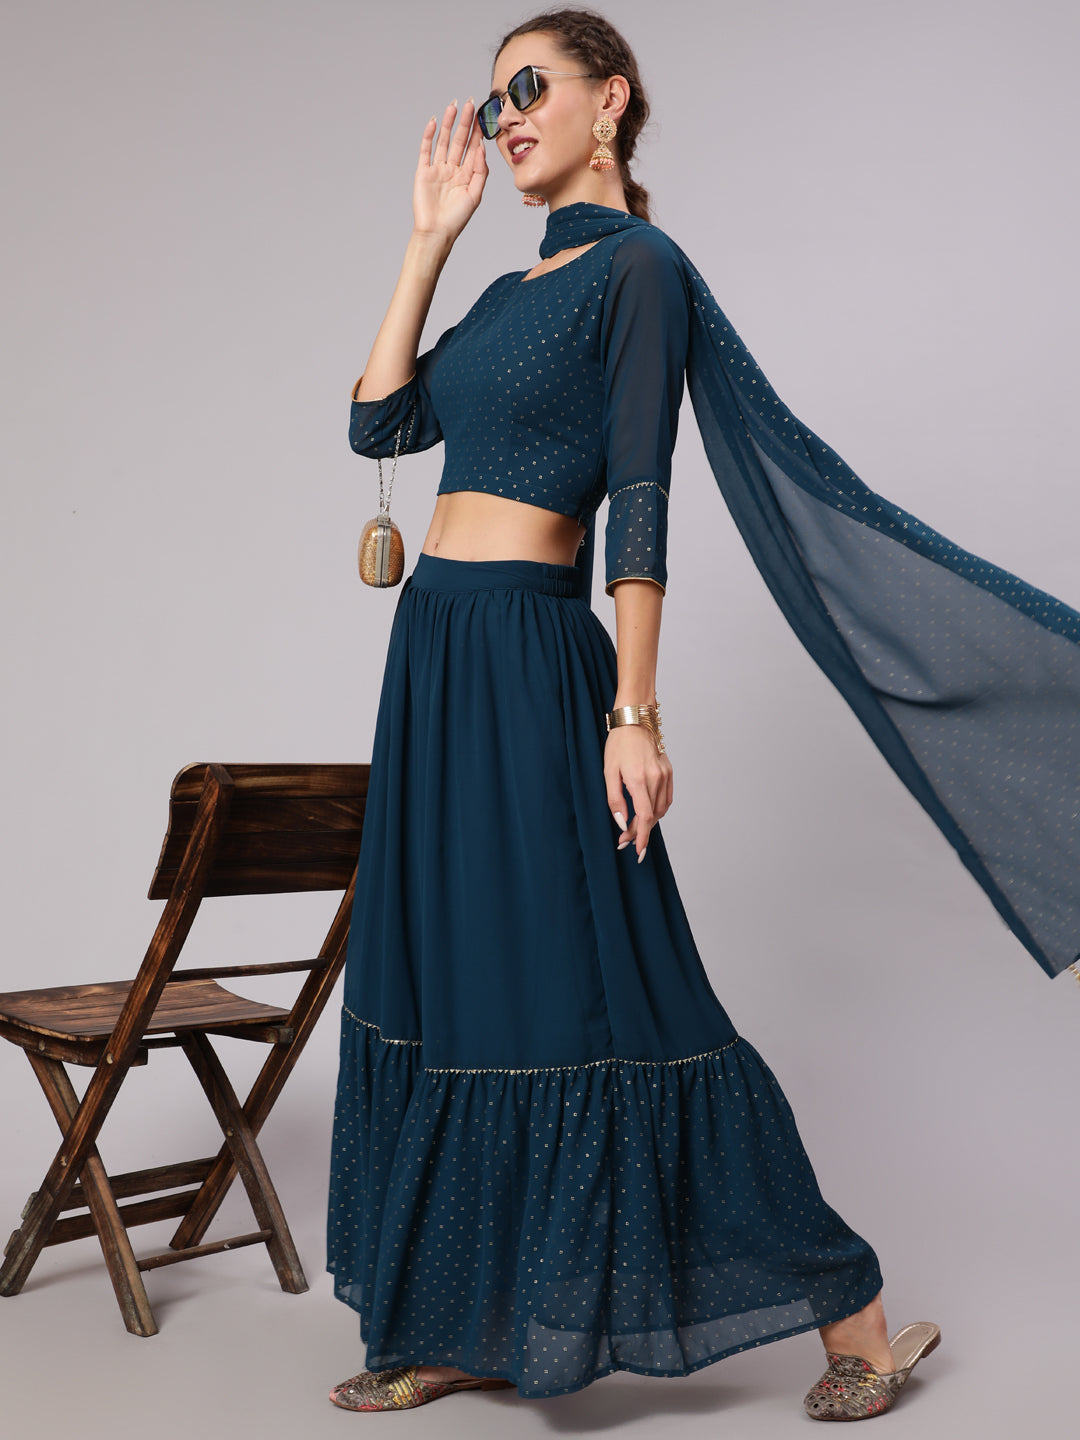 Blue Georgette Gold Print Embellished Lehnga Has Crop Top, Skirt And Dupatta